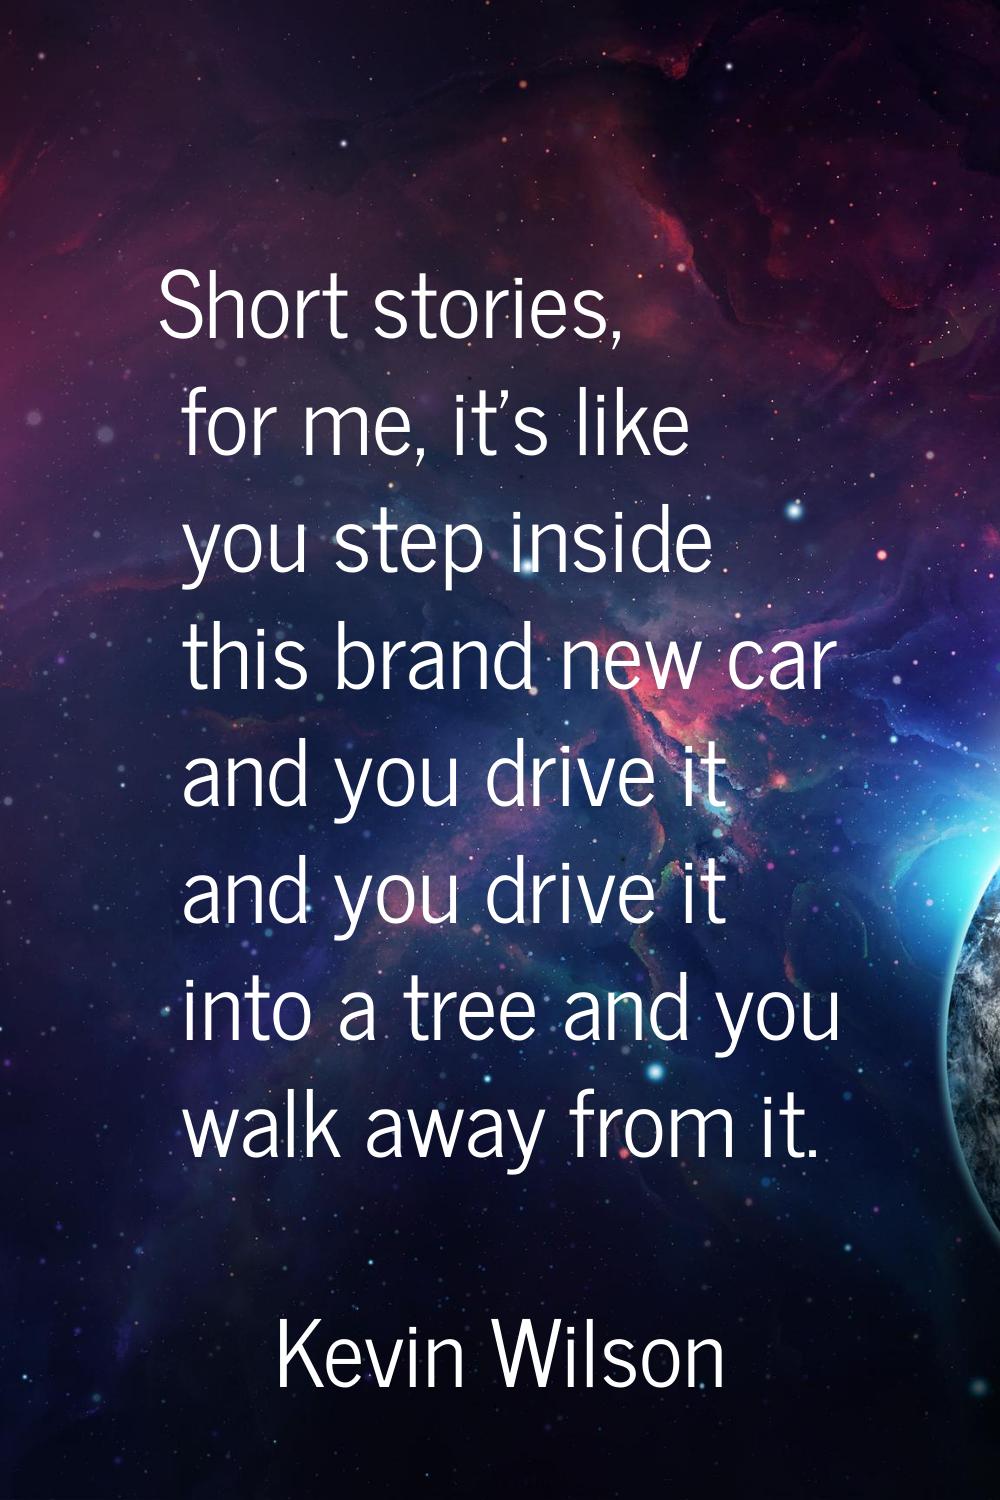 Short stories, for me, it's like you step inside this brand new car and you drive it and you drive 